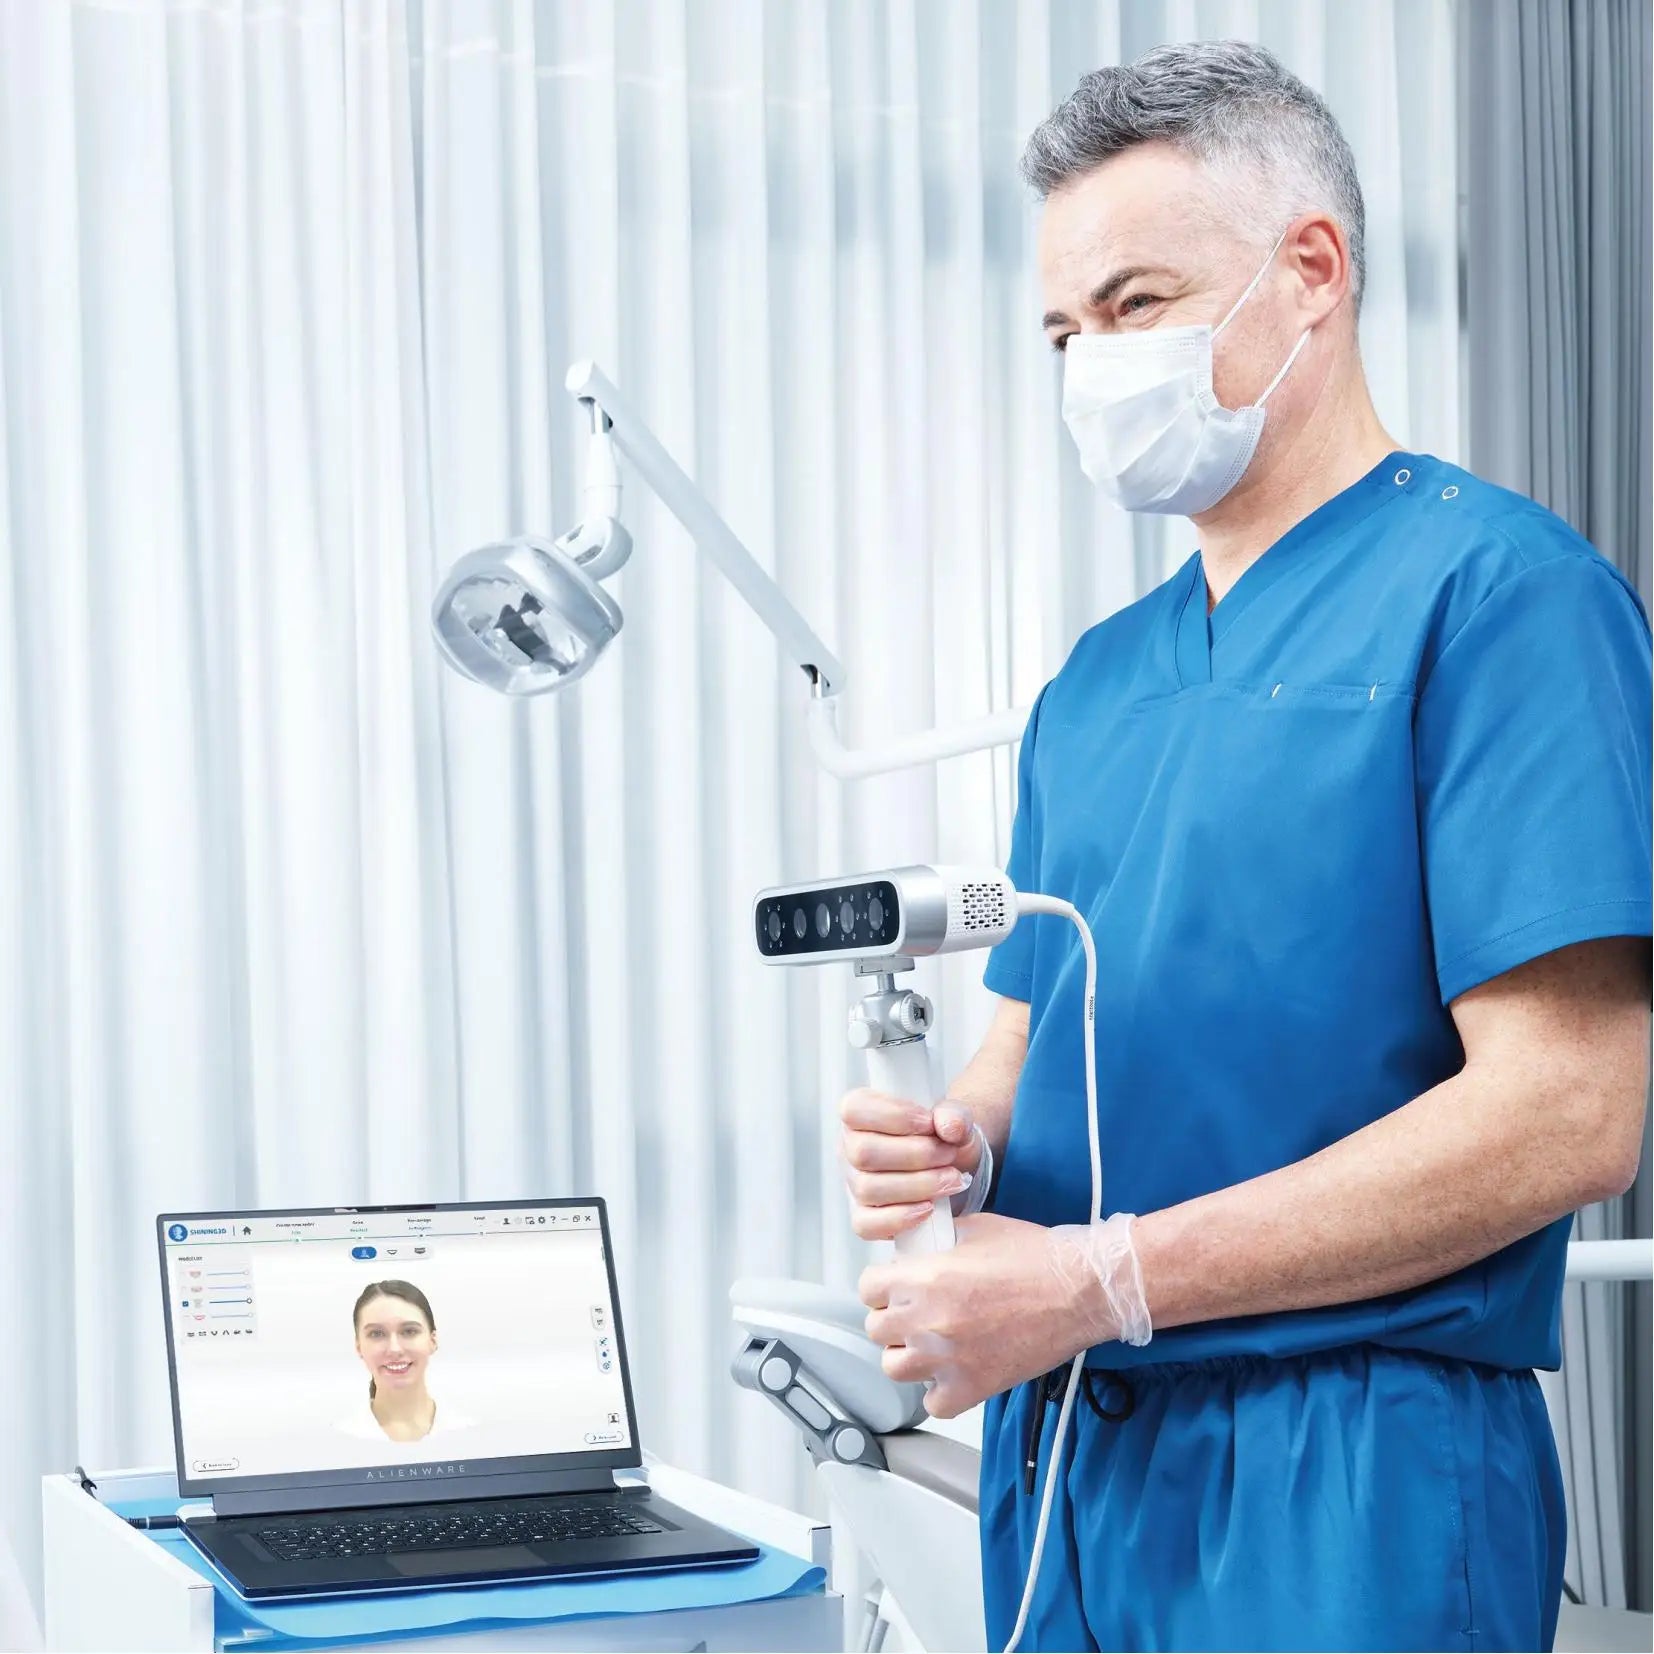 SHINING 3D MetiSmile Dental 3DS Face Scanner - for Dentistry with Fast Scan Speed - and Ortho Simulation price in Pakistan